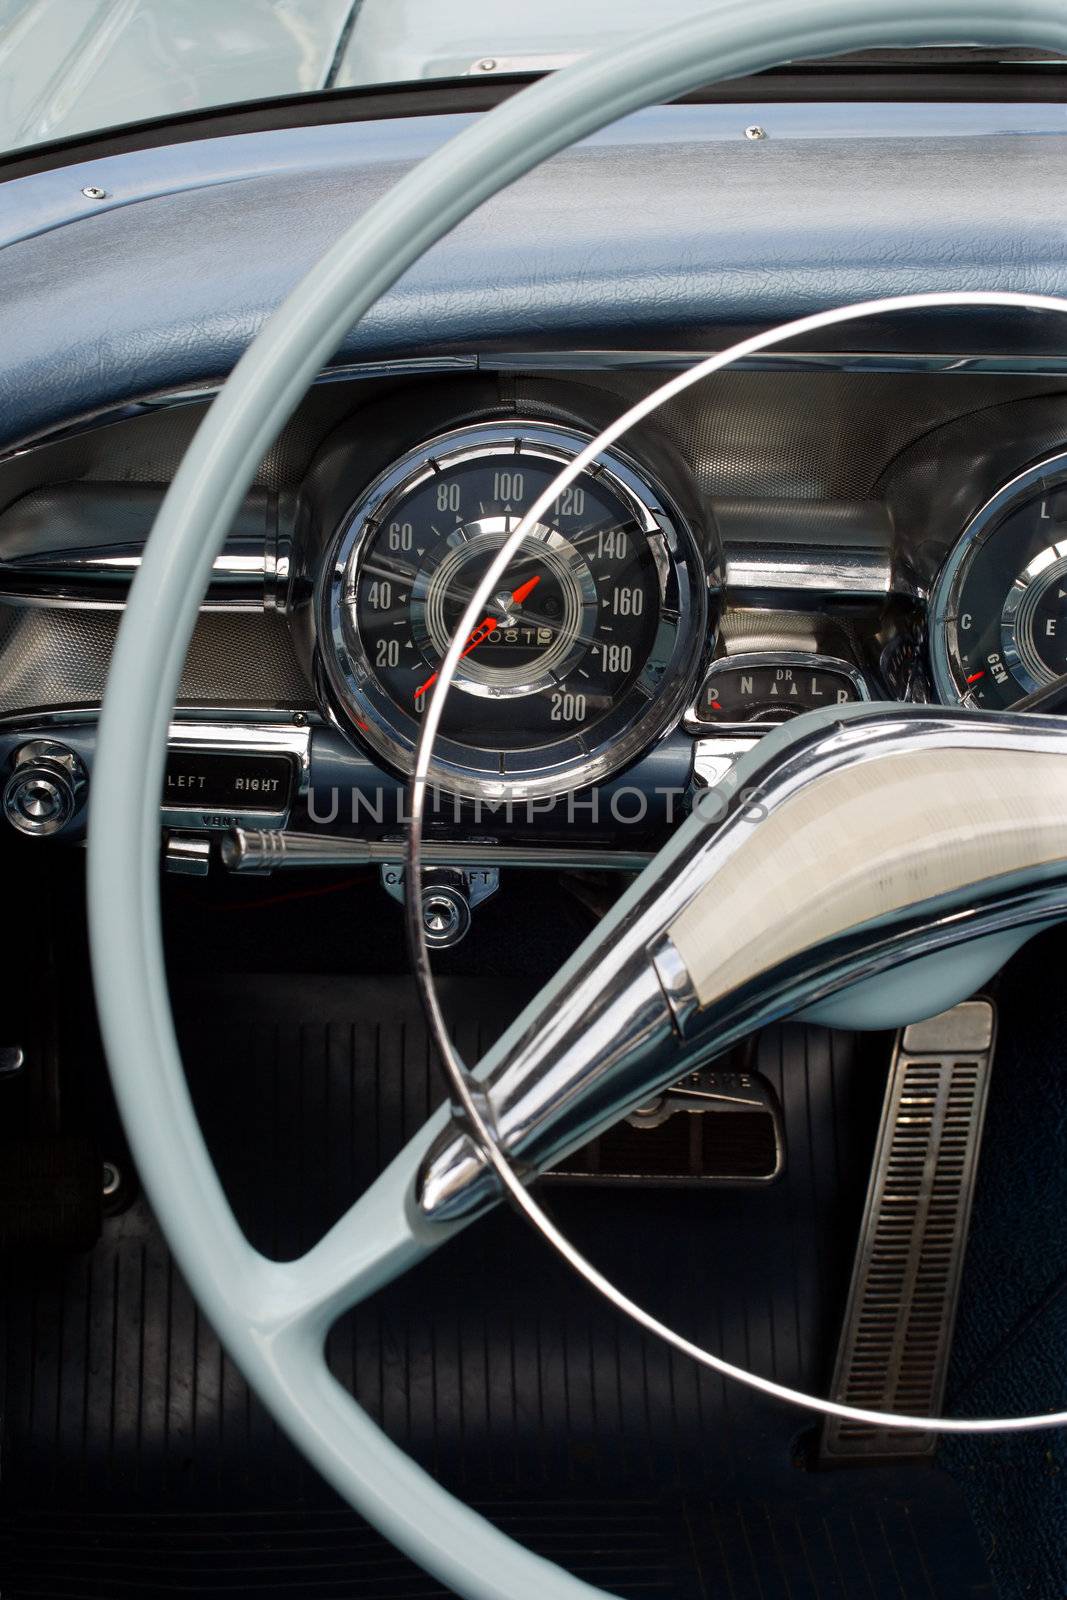 The steering wheel and dashboard of an antique classic car.
